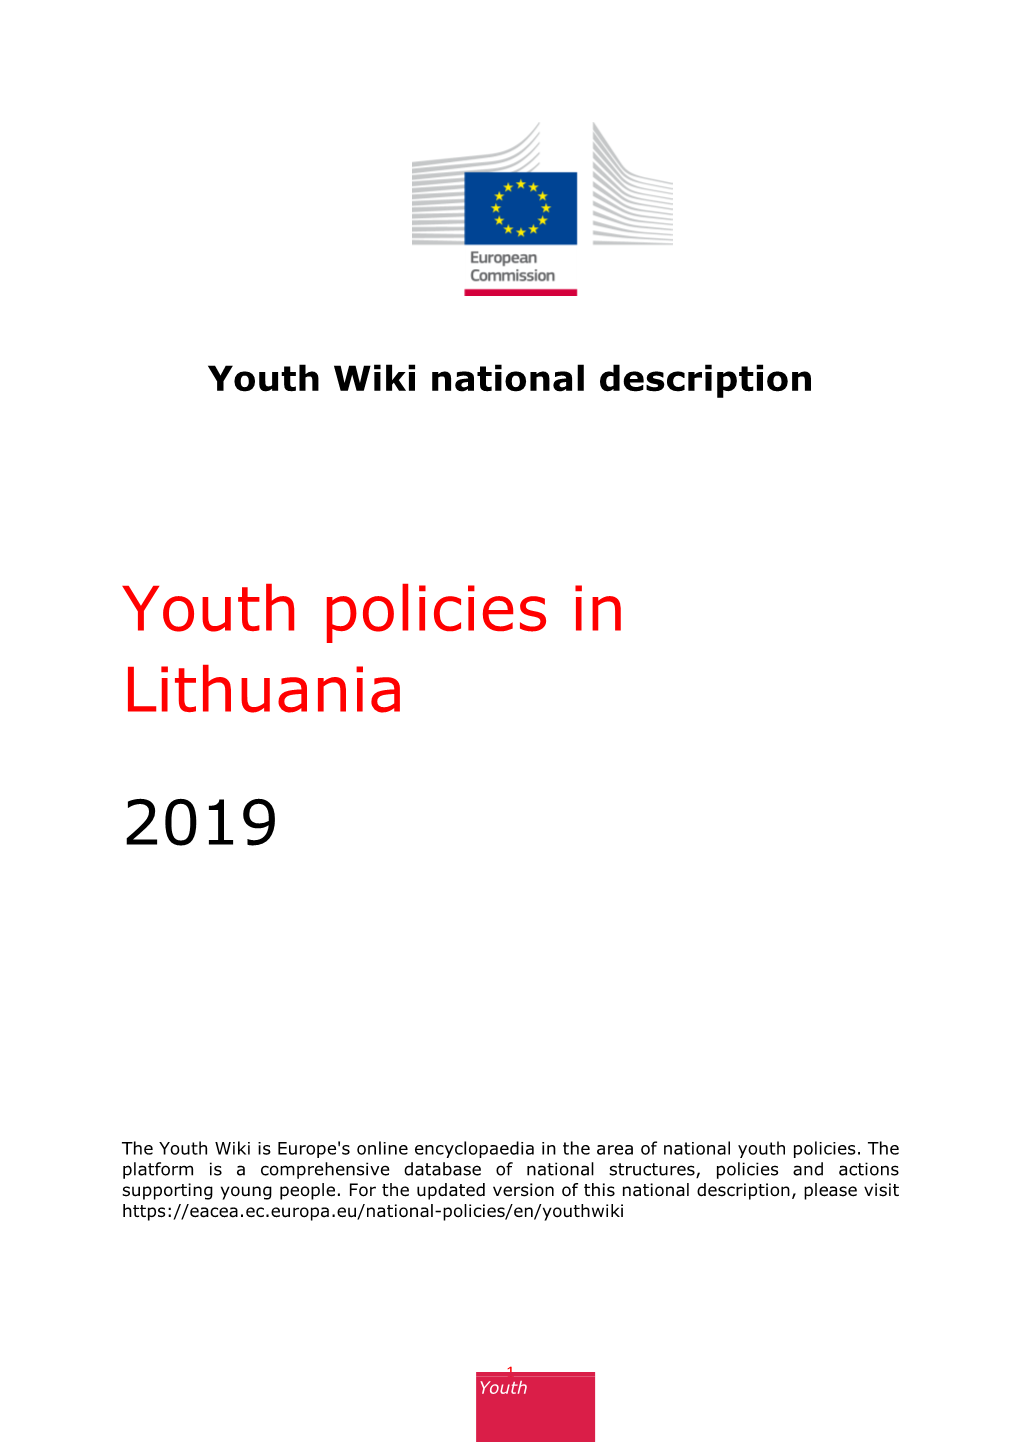 Youth Policies in Lithuania